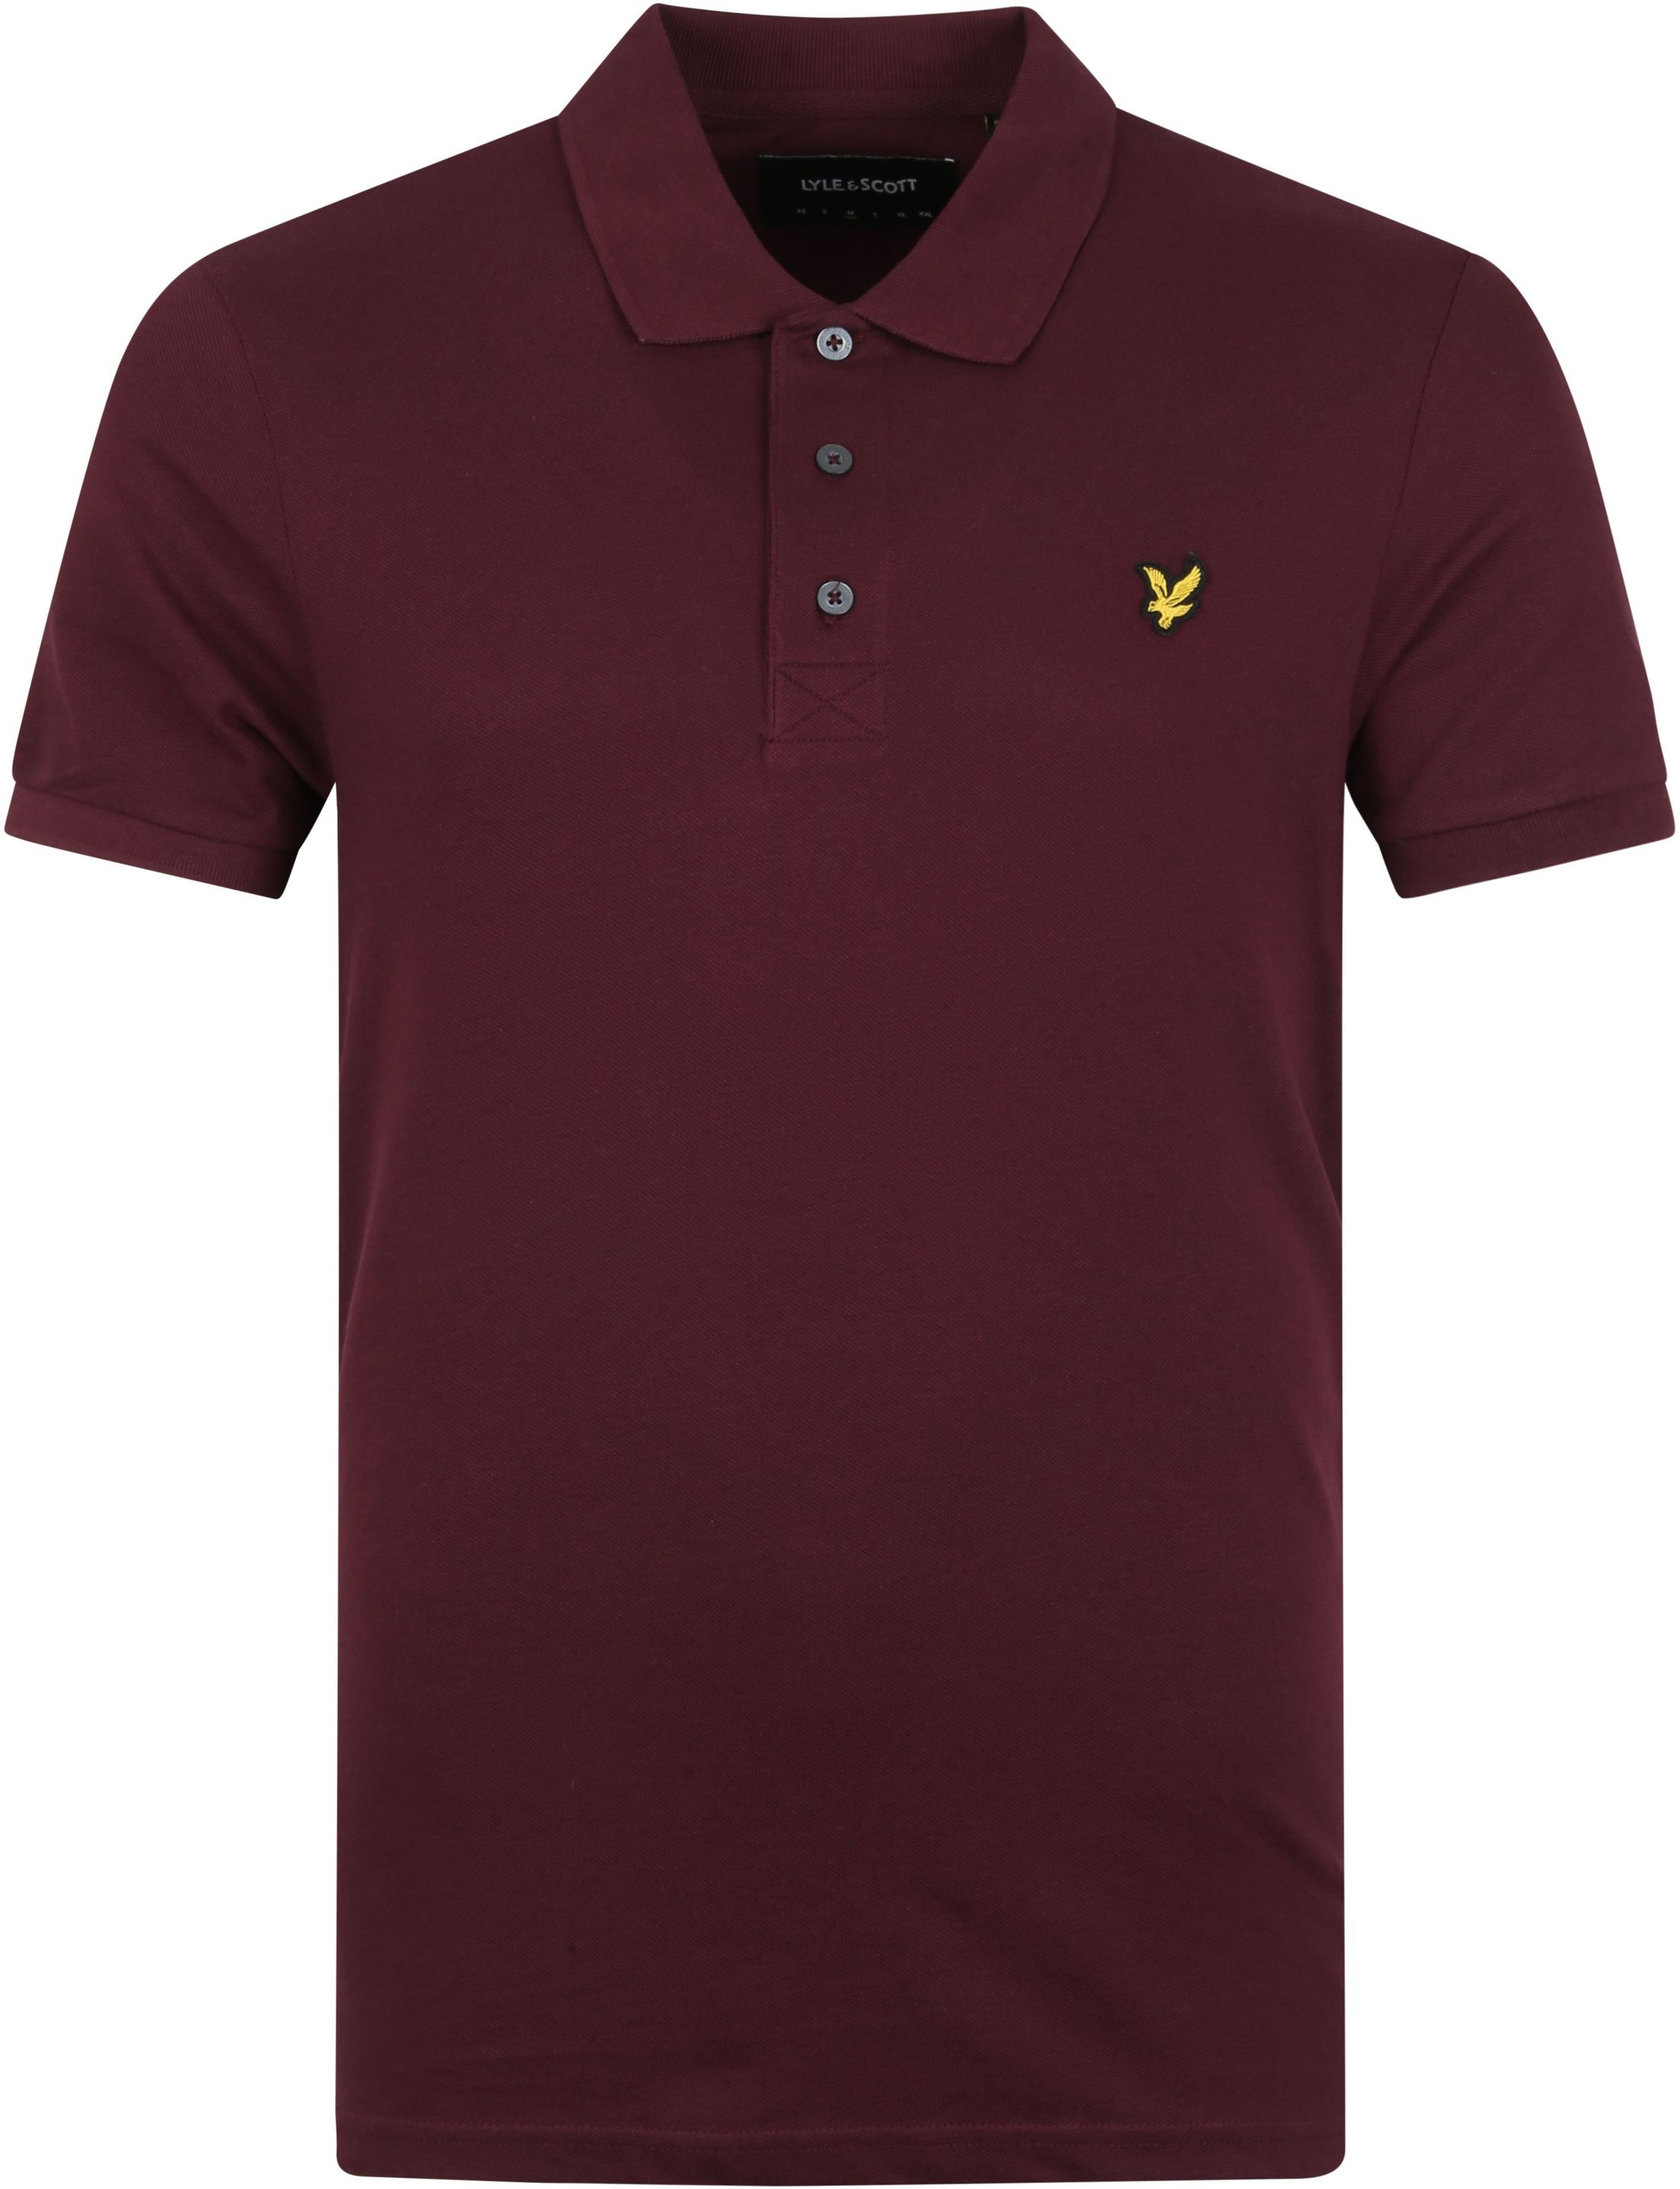 Lyle and Scott Polo Burgundy size M